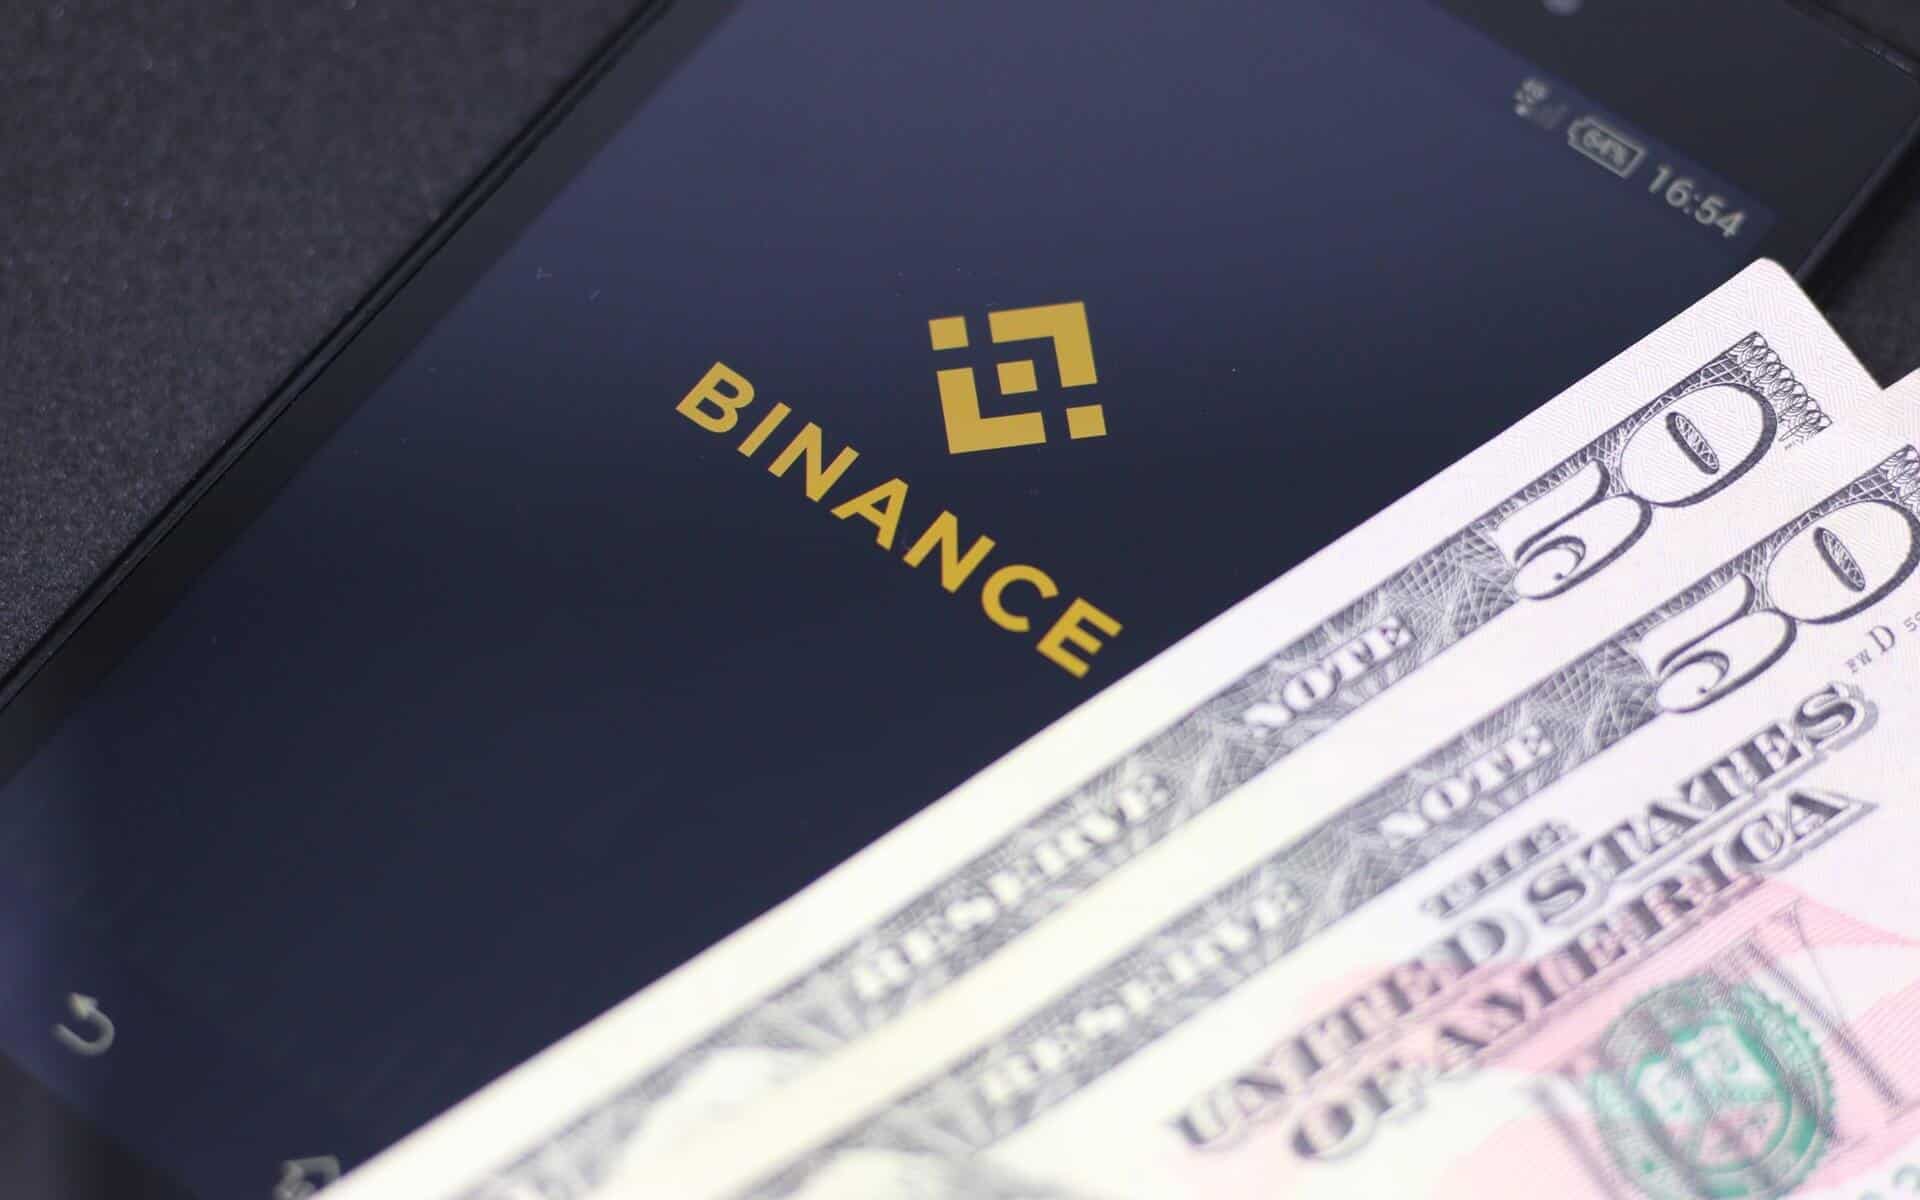 Trading Volumes on Binance's Non-Fungible Tokens have Increased  Substantially